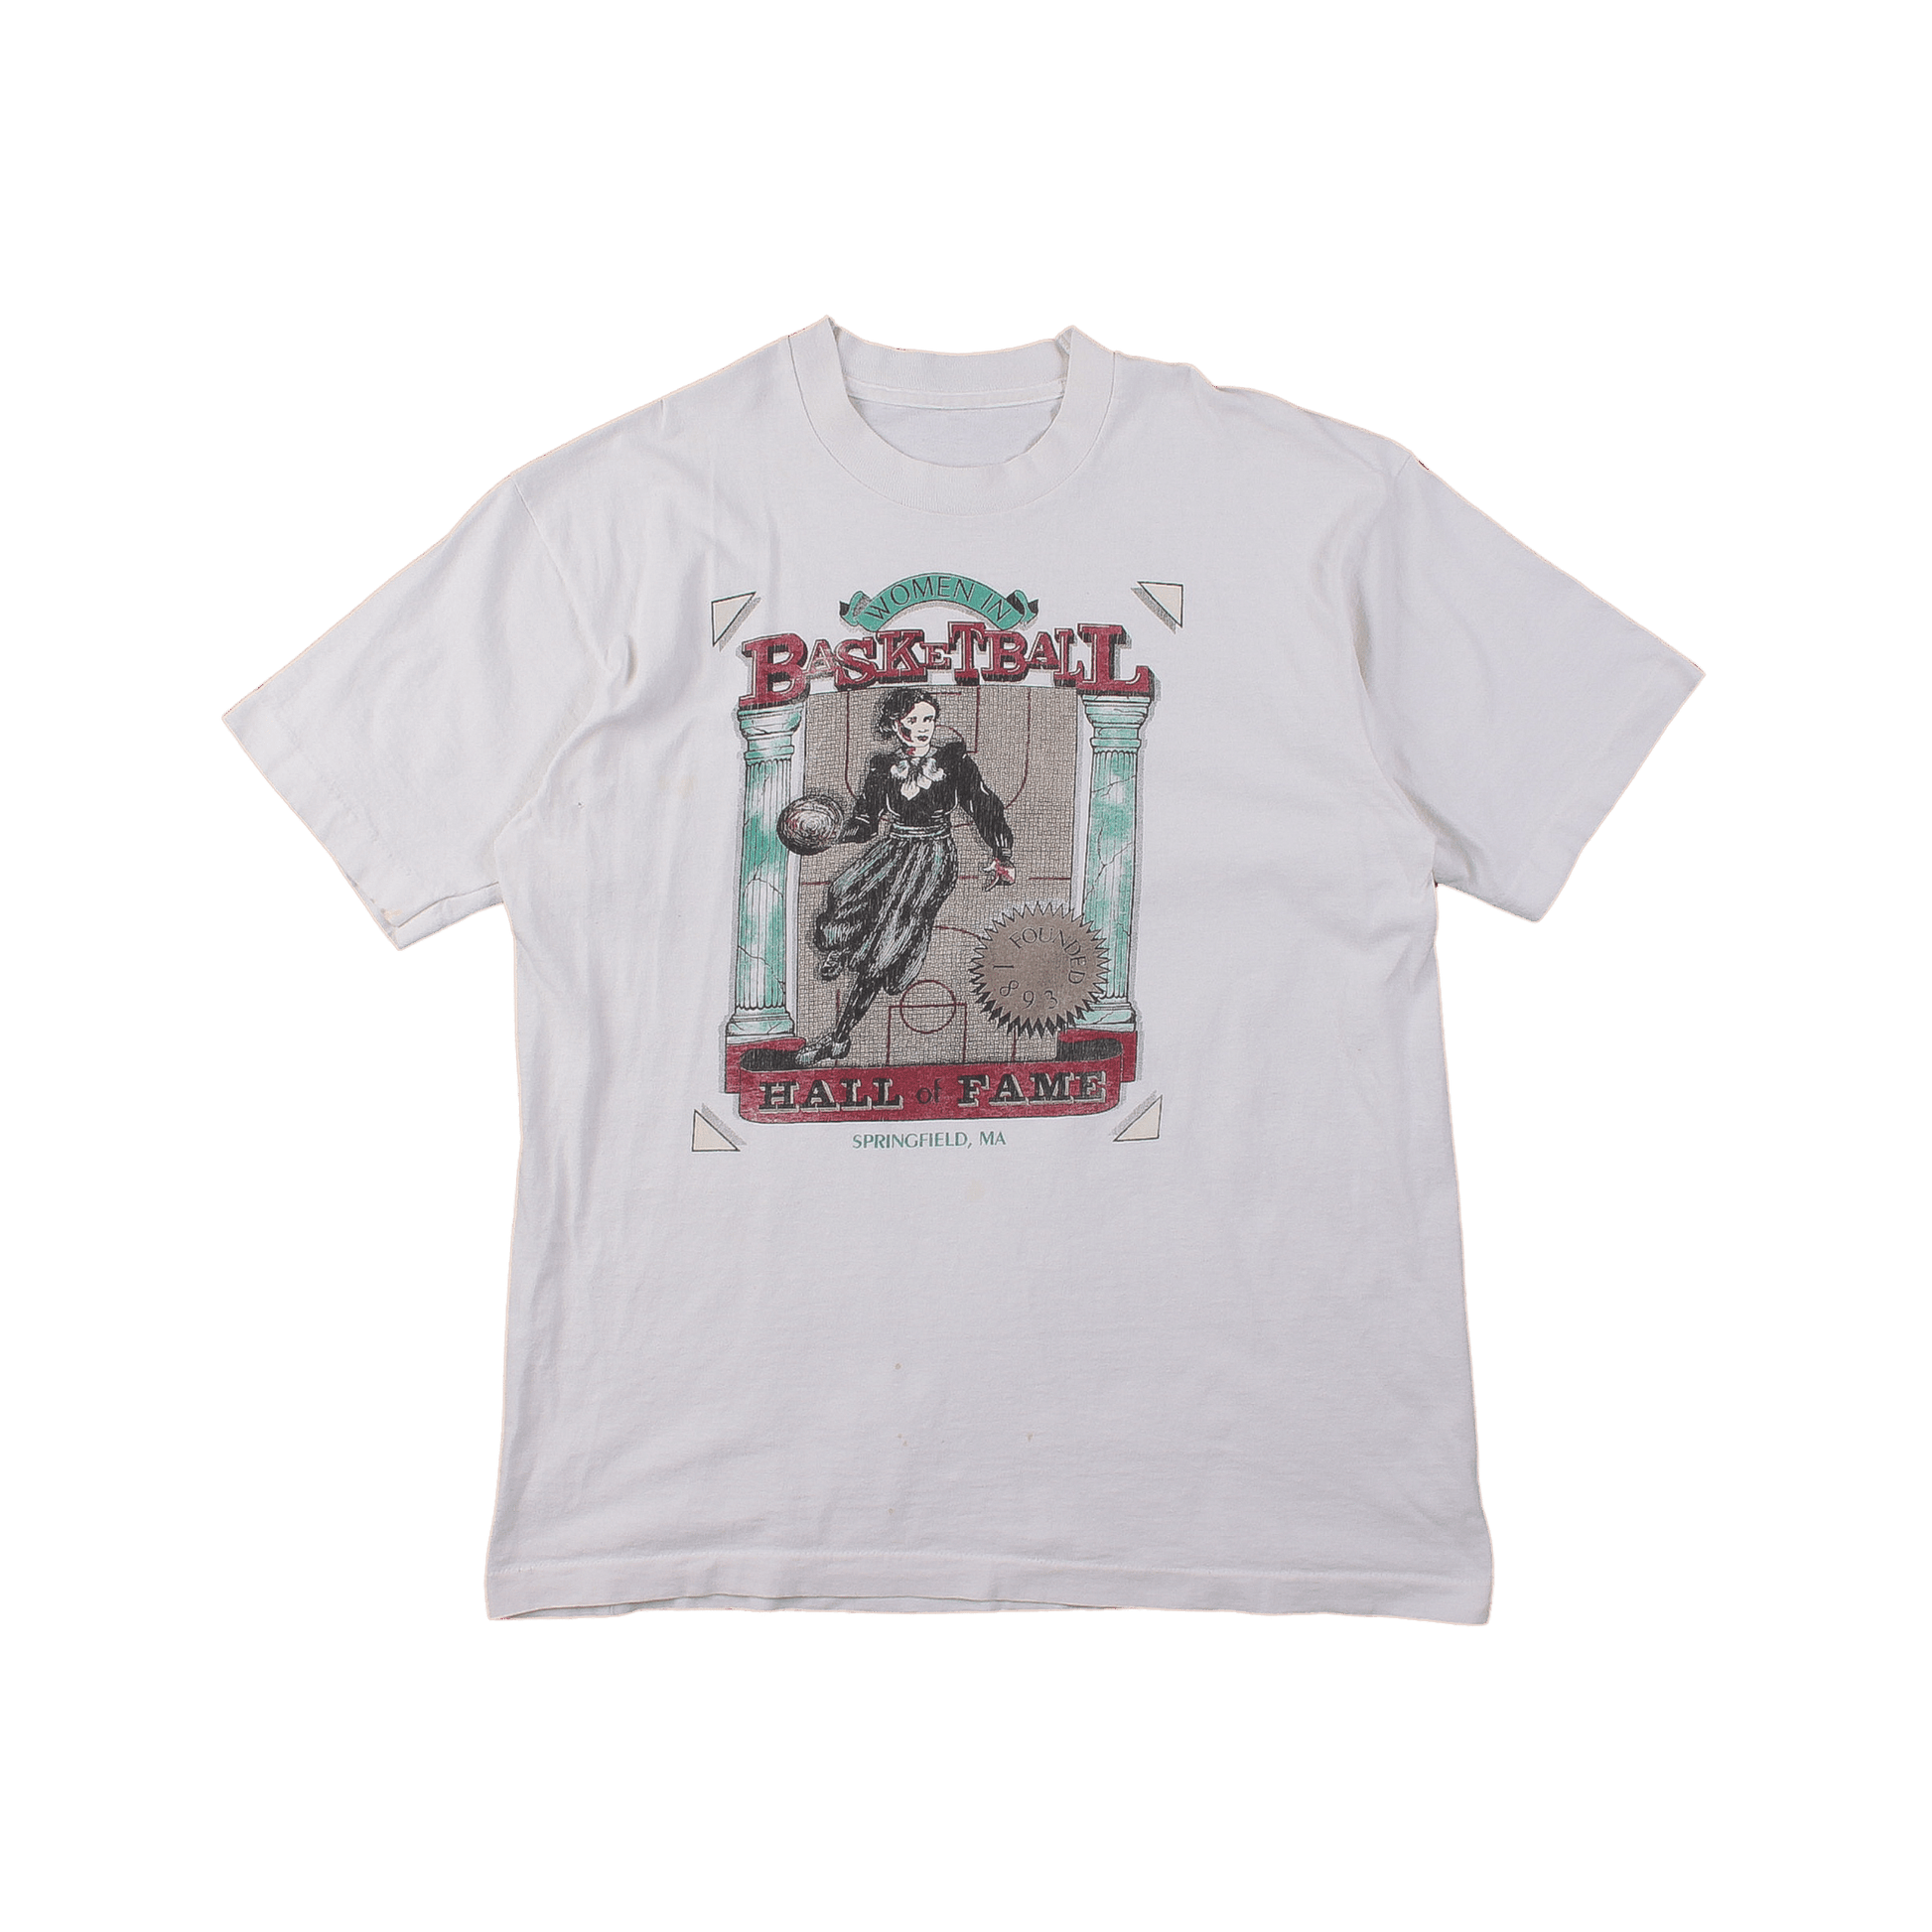 'Women in Basketball' T-Shirt - American Madness